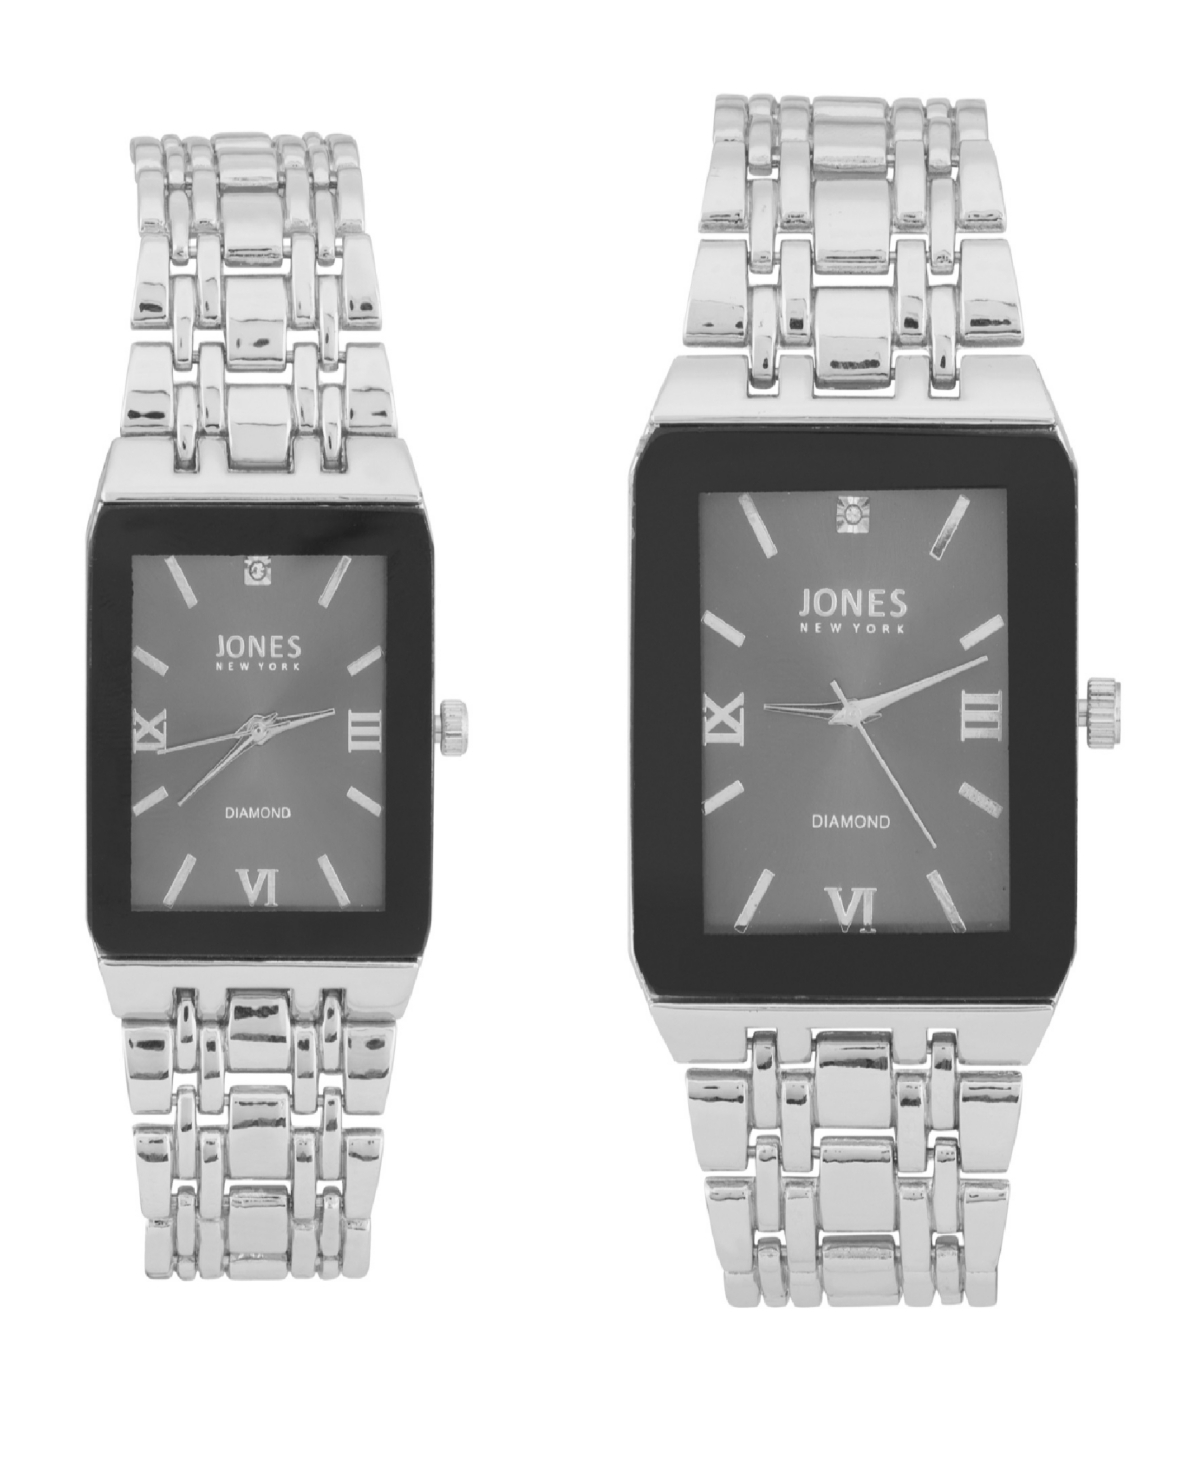 Men and Women's Analog Shiny Silver-Tone Metal Bracelet His Hers Watch 40mm, 32mm Gift Set - Black, Silver